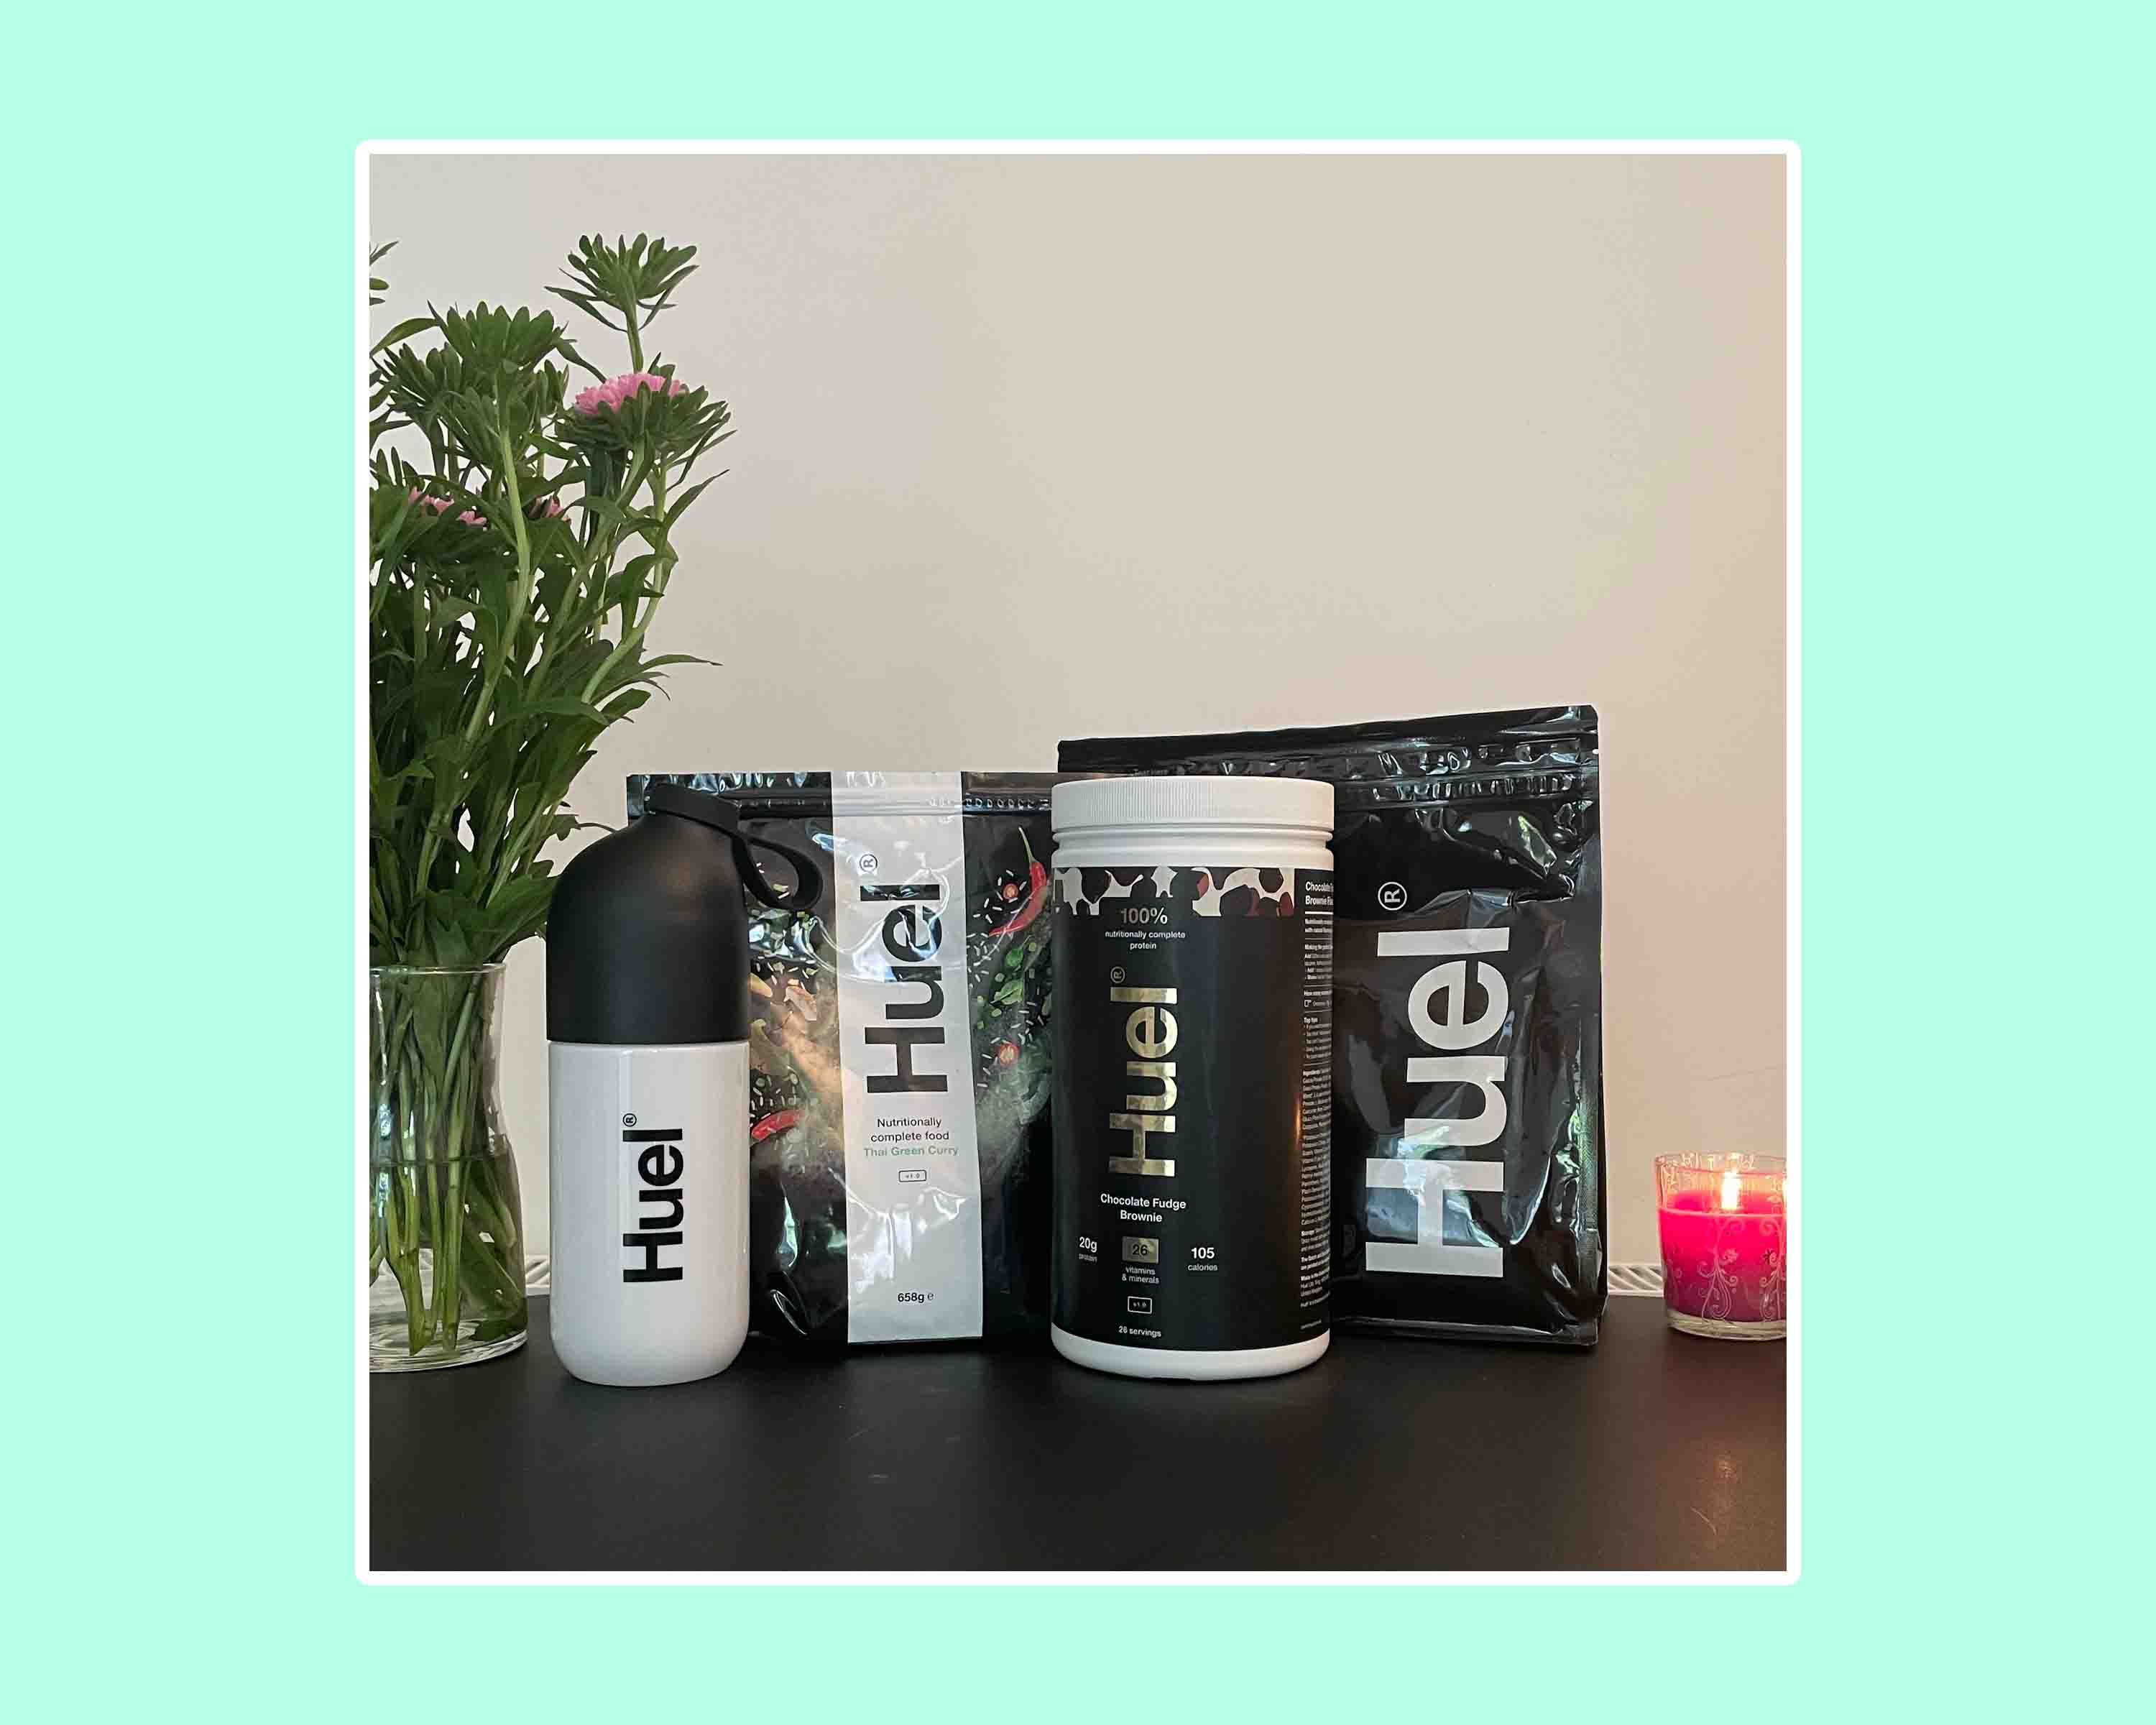 Huel Ready-to-drink: A Convenient Meal Replacement